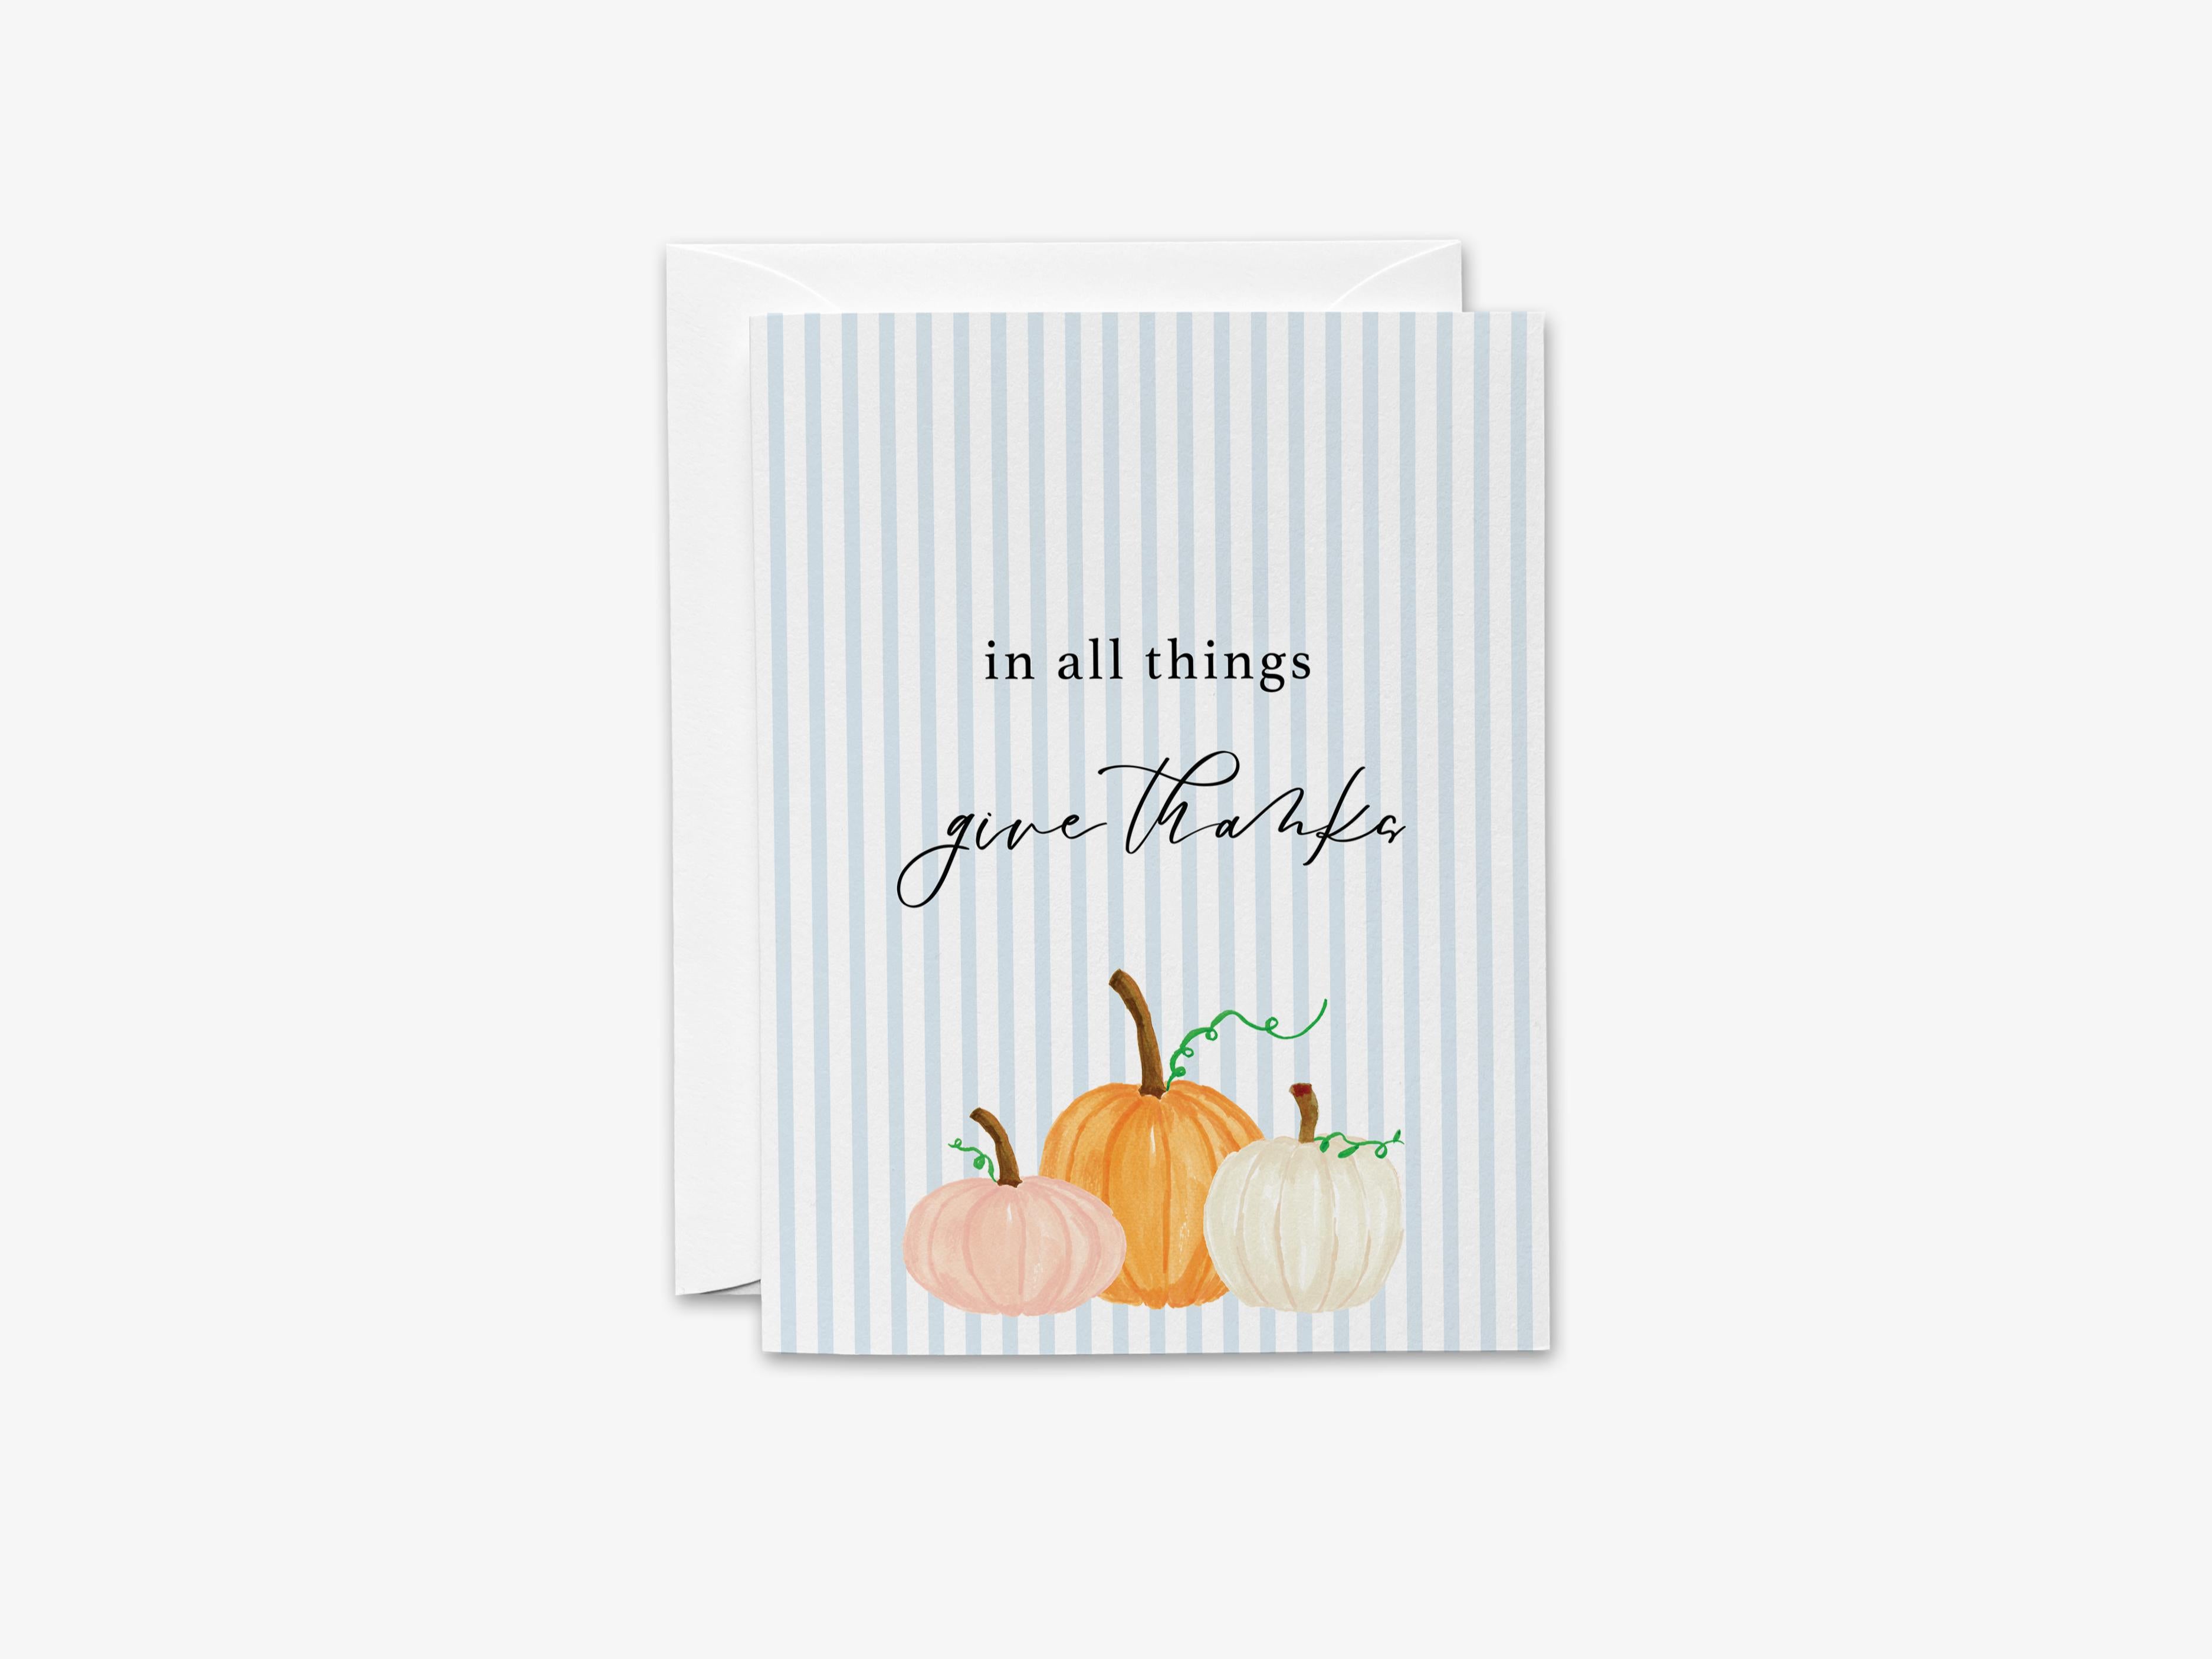 In All Things Give Thanks Greeting Card-These folded greeting cards are 4.25x5.5 and feature our hand-painted pumpkins, printed in the USA on 100lb textured stock. They come with a White envelope and make a great Fall season card for the pumpkin and pumpkin lover in your life.-The Singing Little Bird